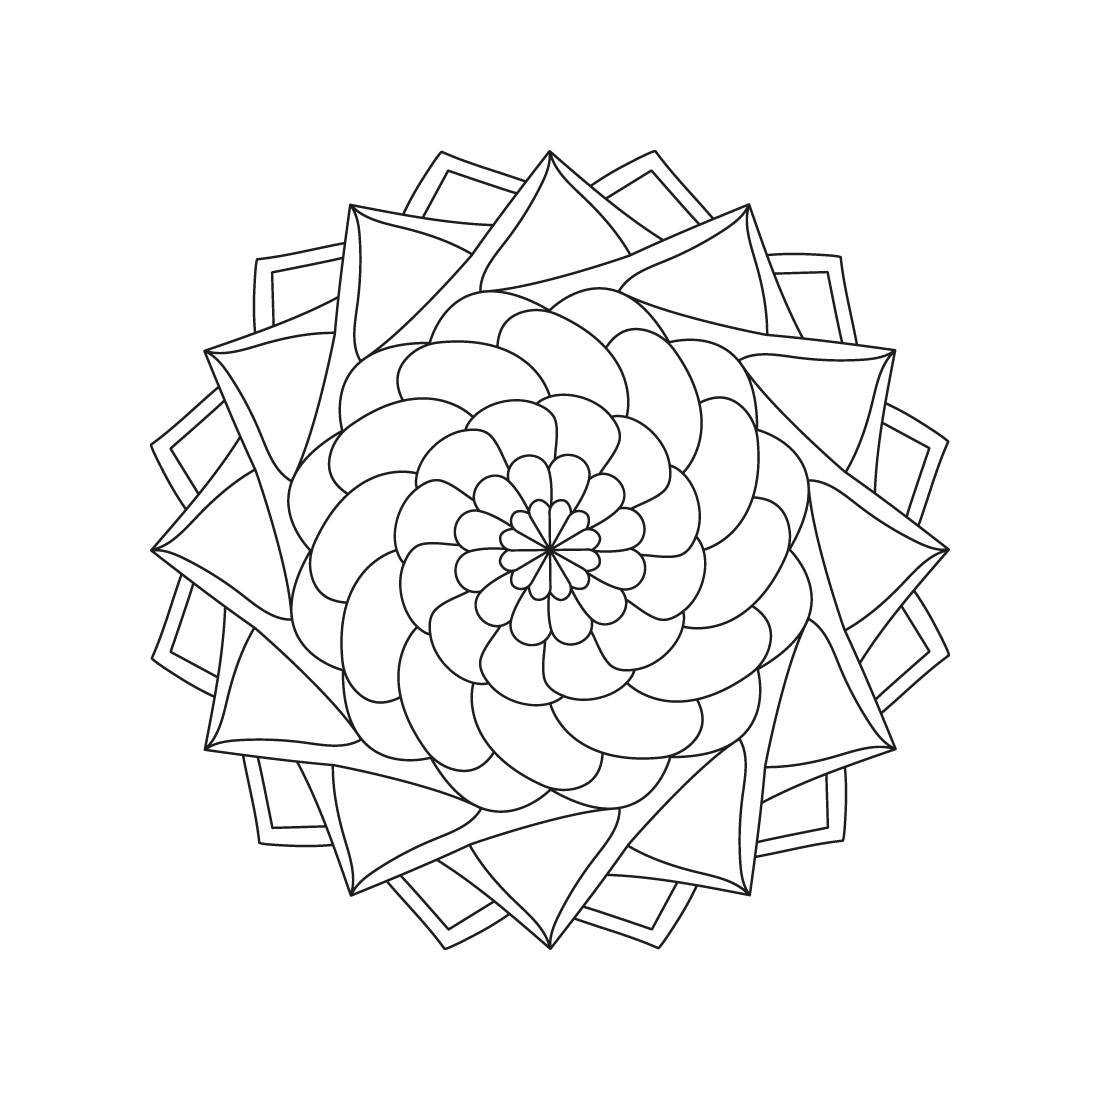 Bundle of 10 Ornate Opulence Mandala for KDP Coloring Book interior Pages preview image.